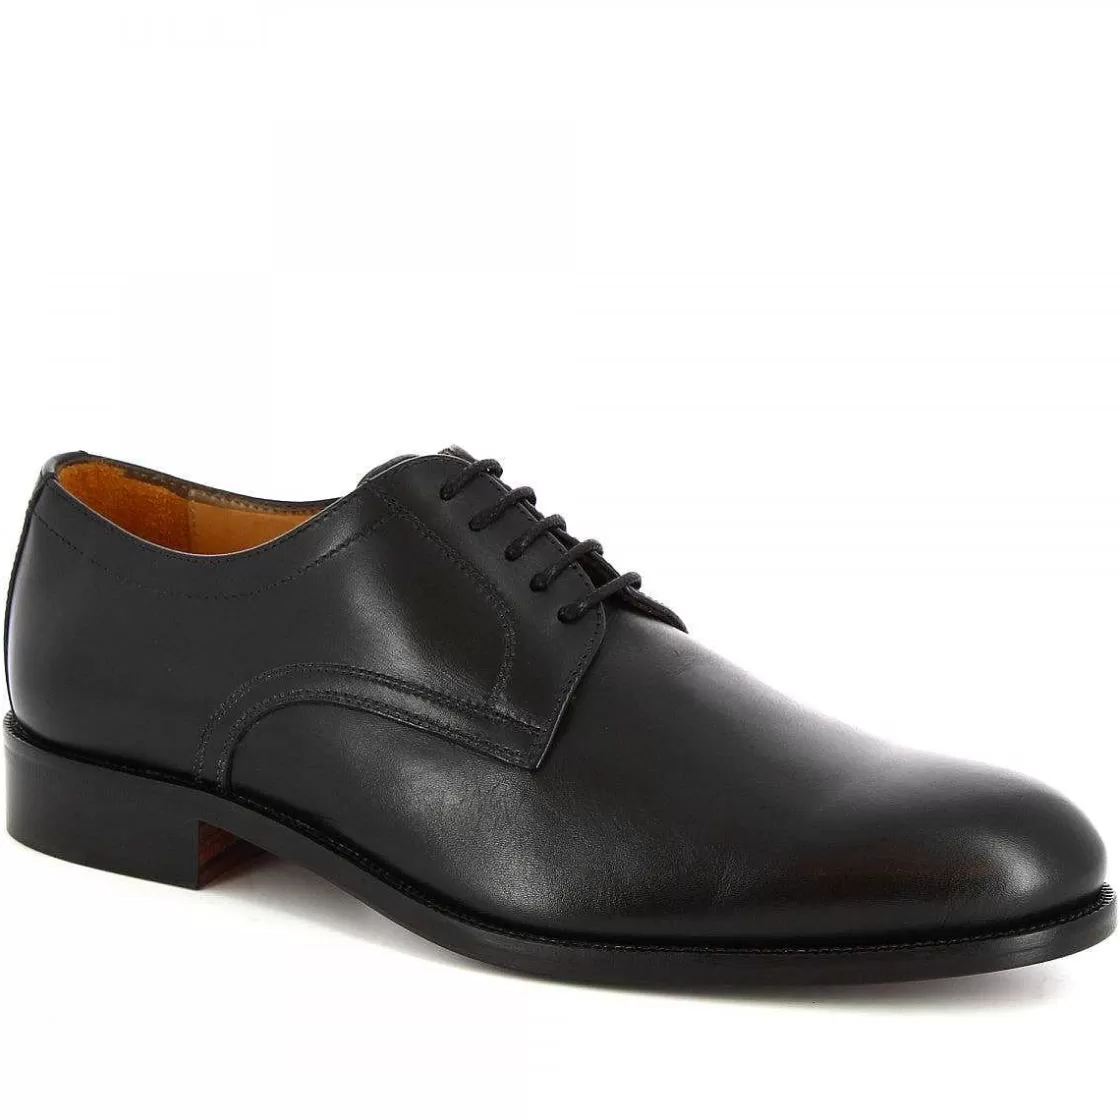 Leonardo Handmade Men'S Lace-Up Oxford Shoes In Black Calf Leather Cheap